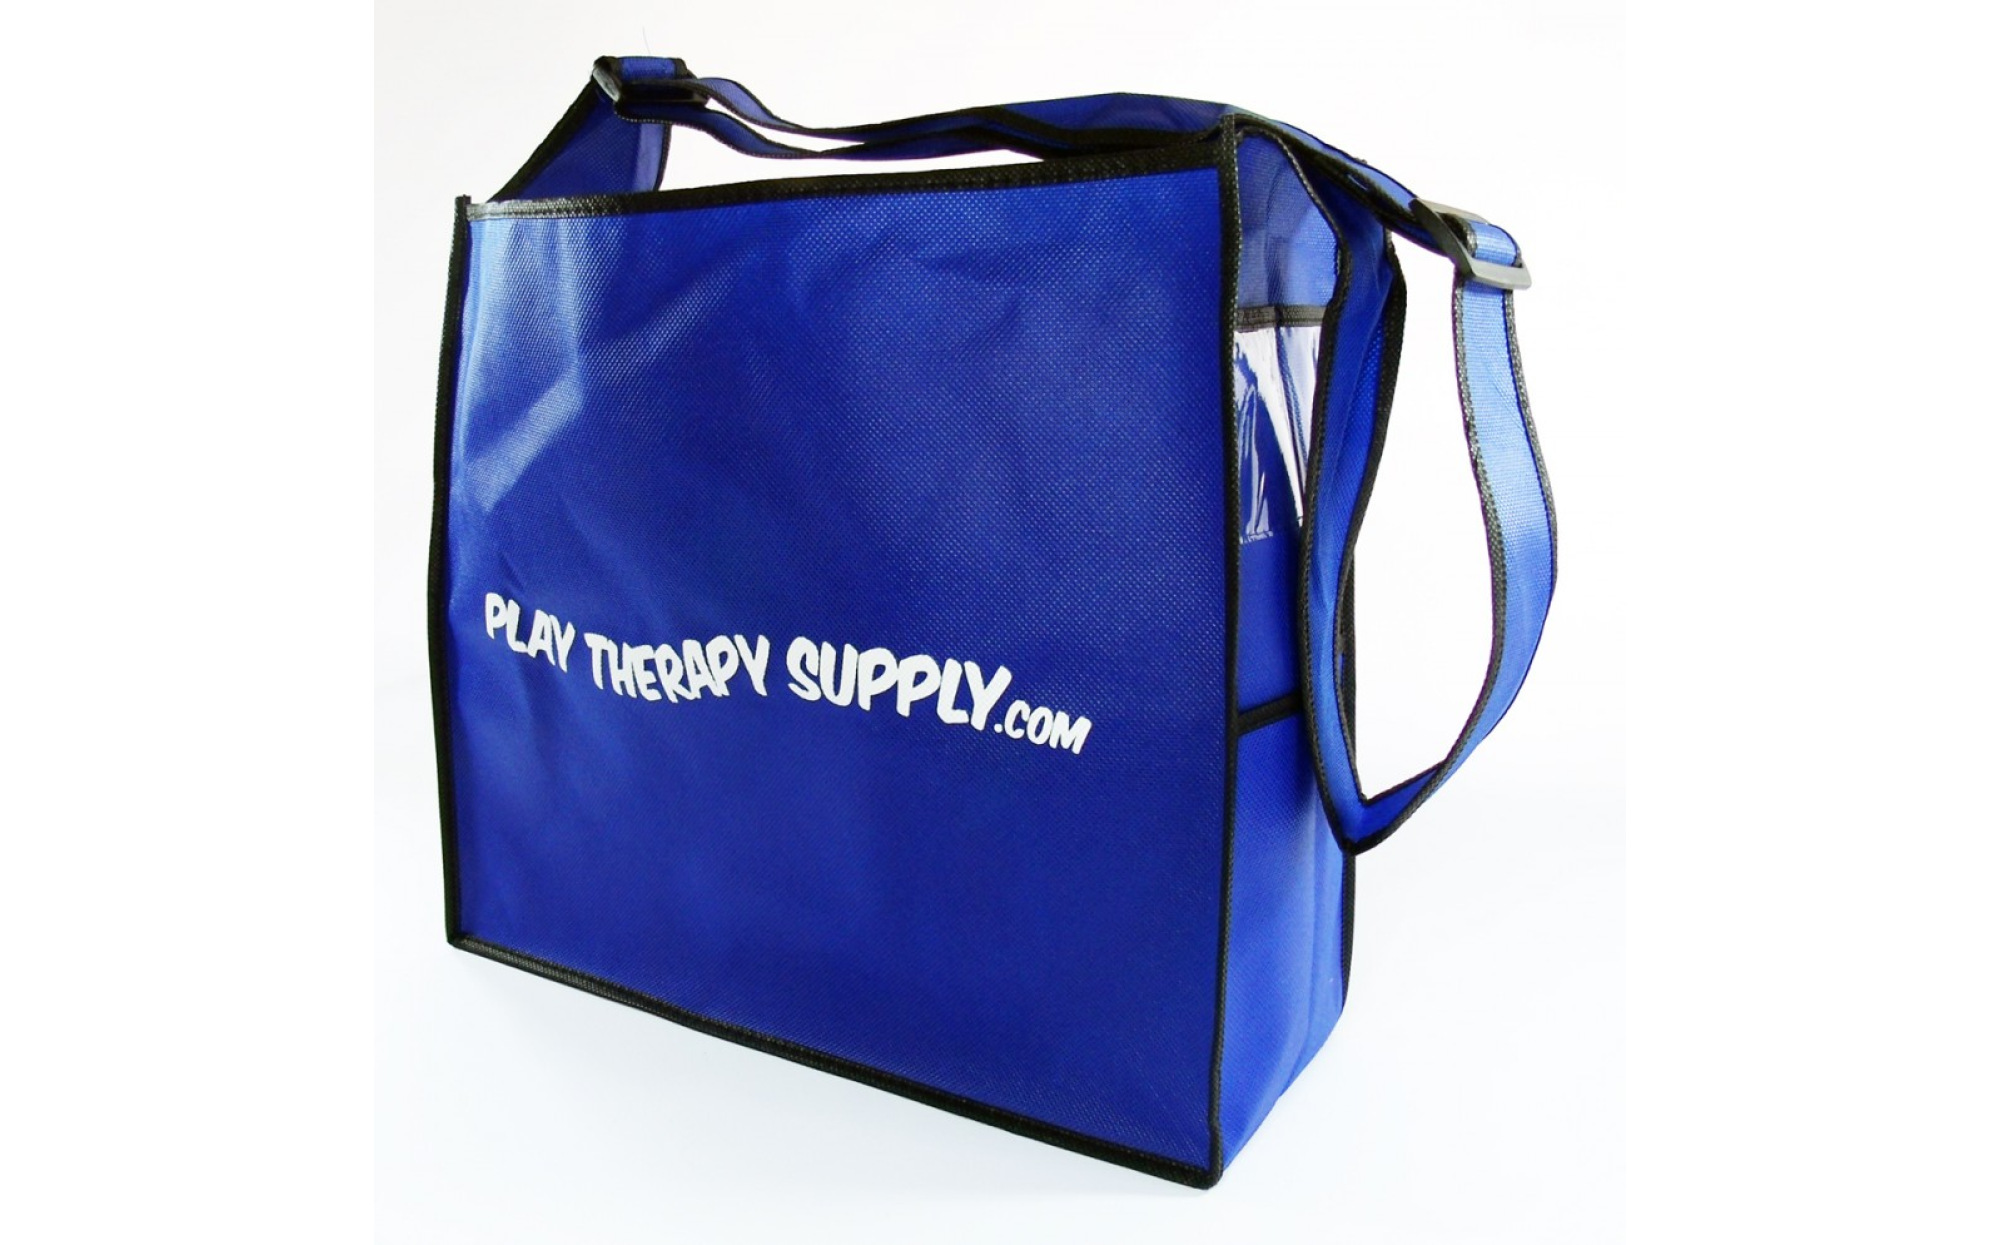 image therapy  Bags, Purses and bags, Purses